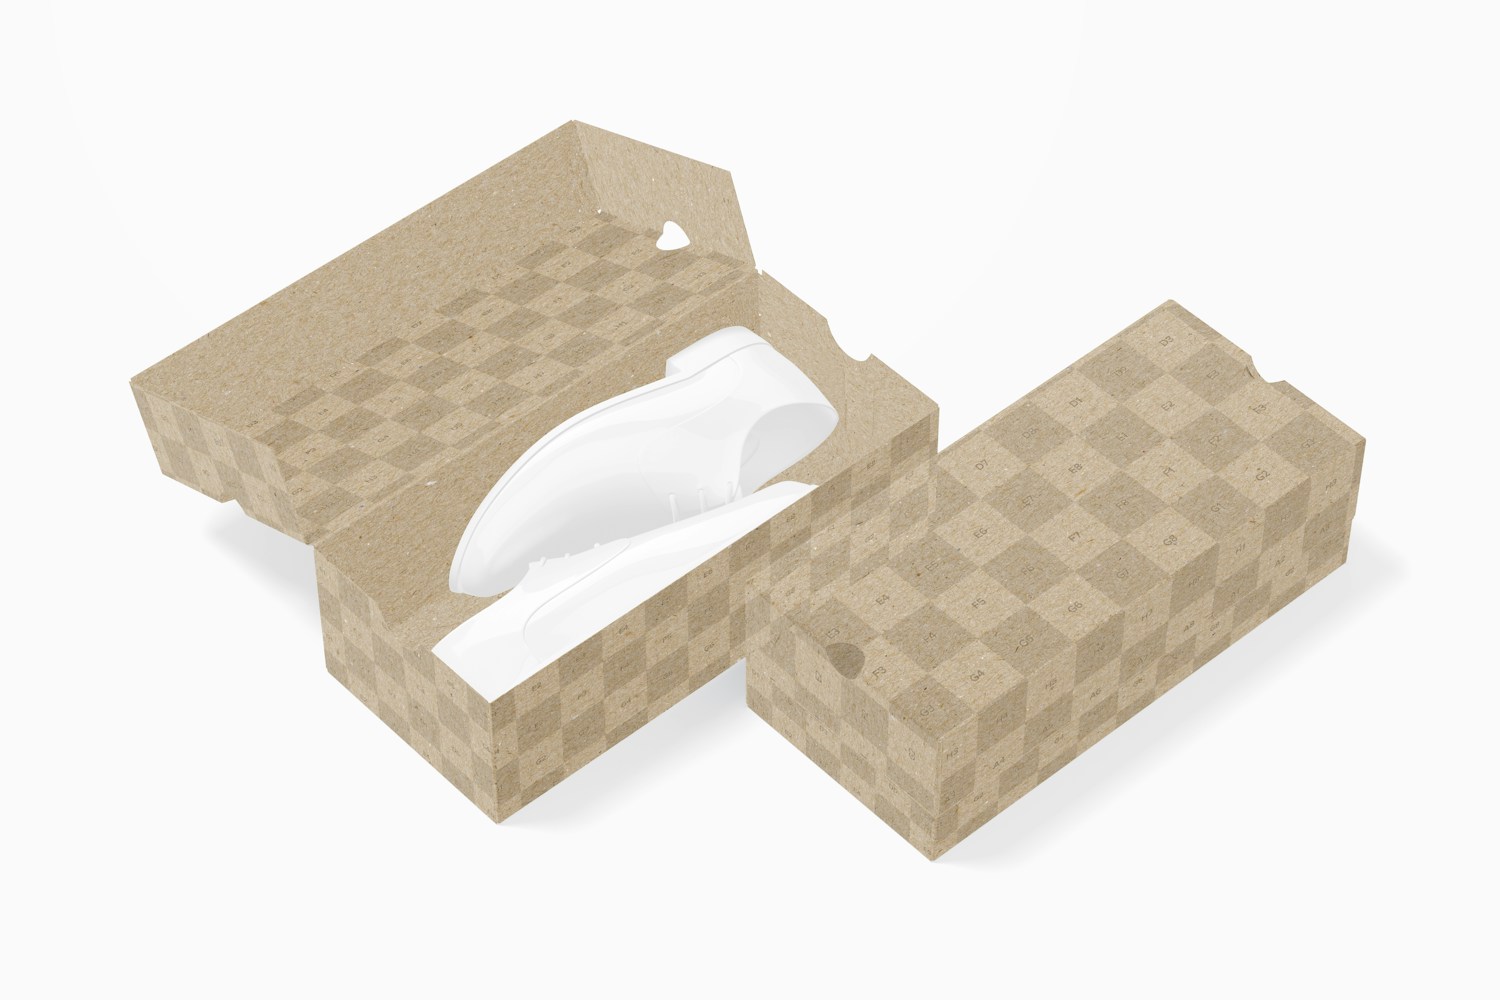 Shoe Boxes Mockup, Opened and Closed